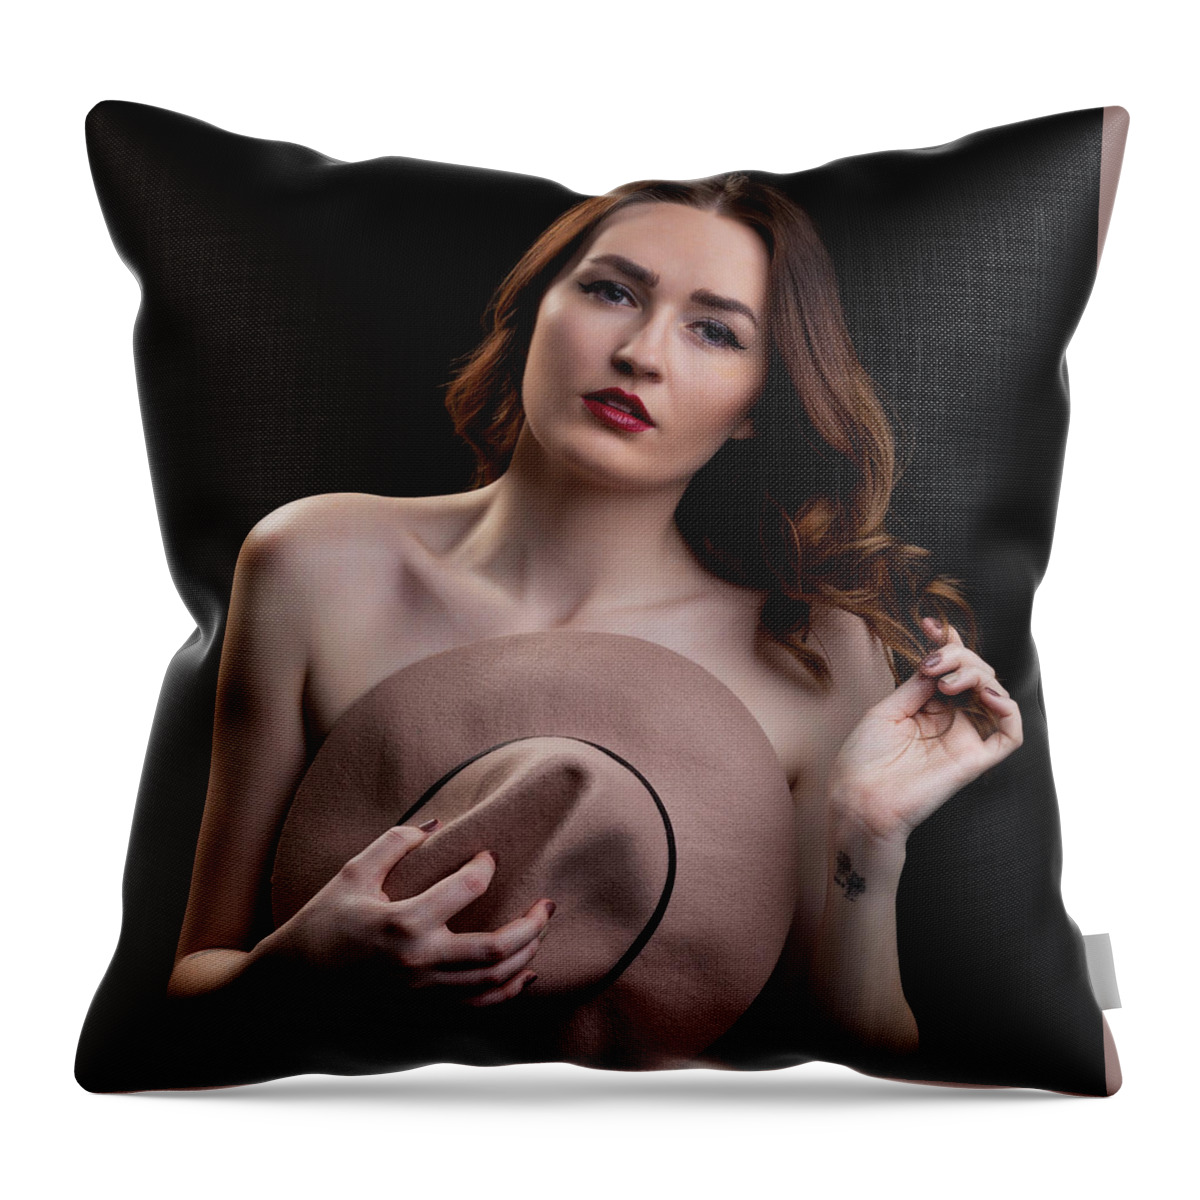 Bow Tie Throw Pillow featuring the photograph Bow Ties And Hats #1 by La Bella Vita Boudoir